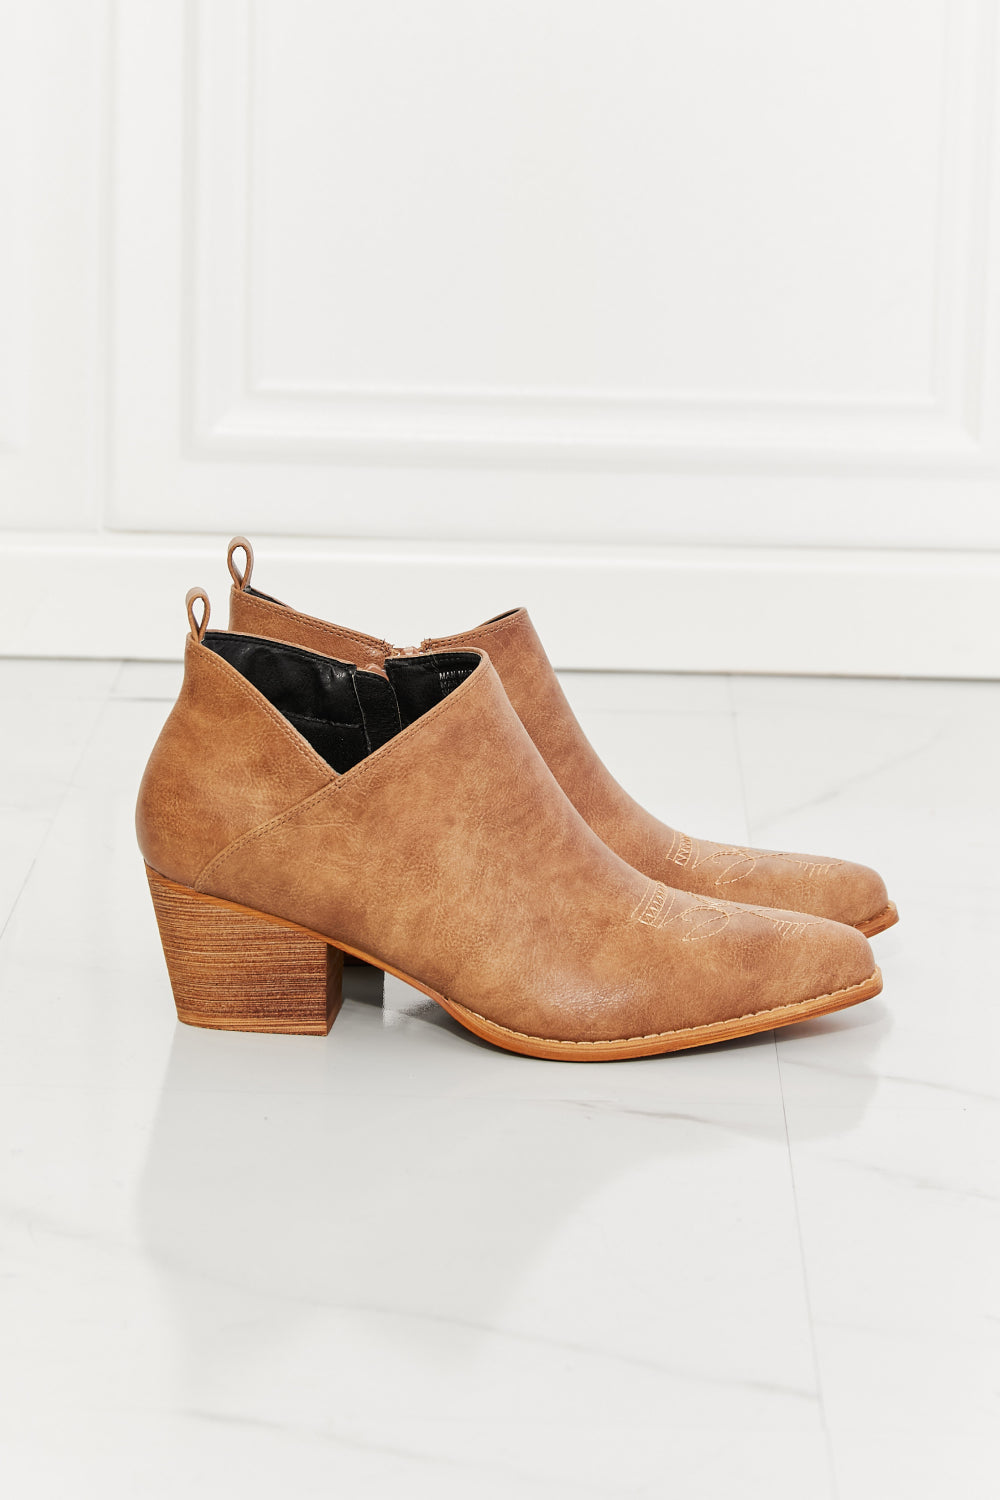 Trust Yourself Embroidered Crossover Cowboy Bootie in Caramel | KIKI COUTURE